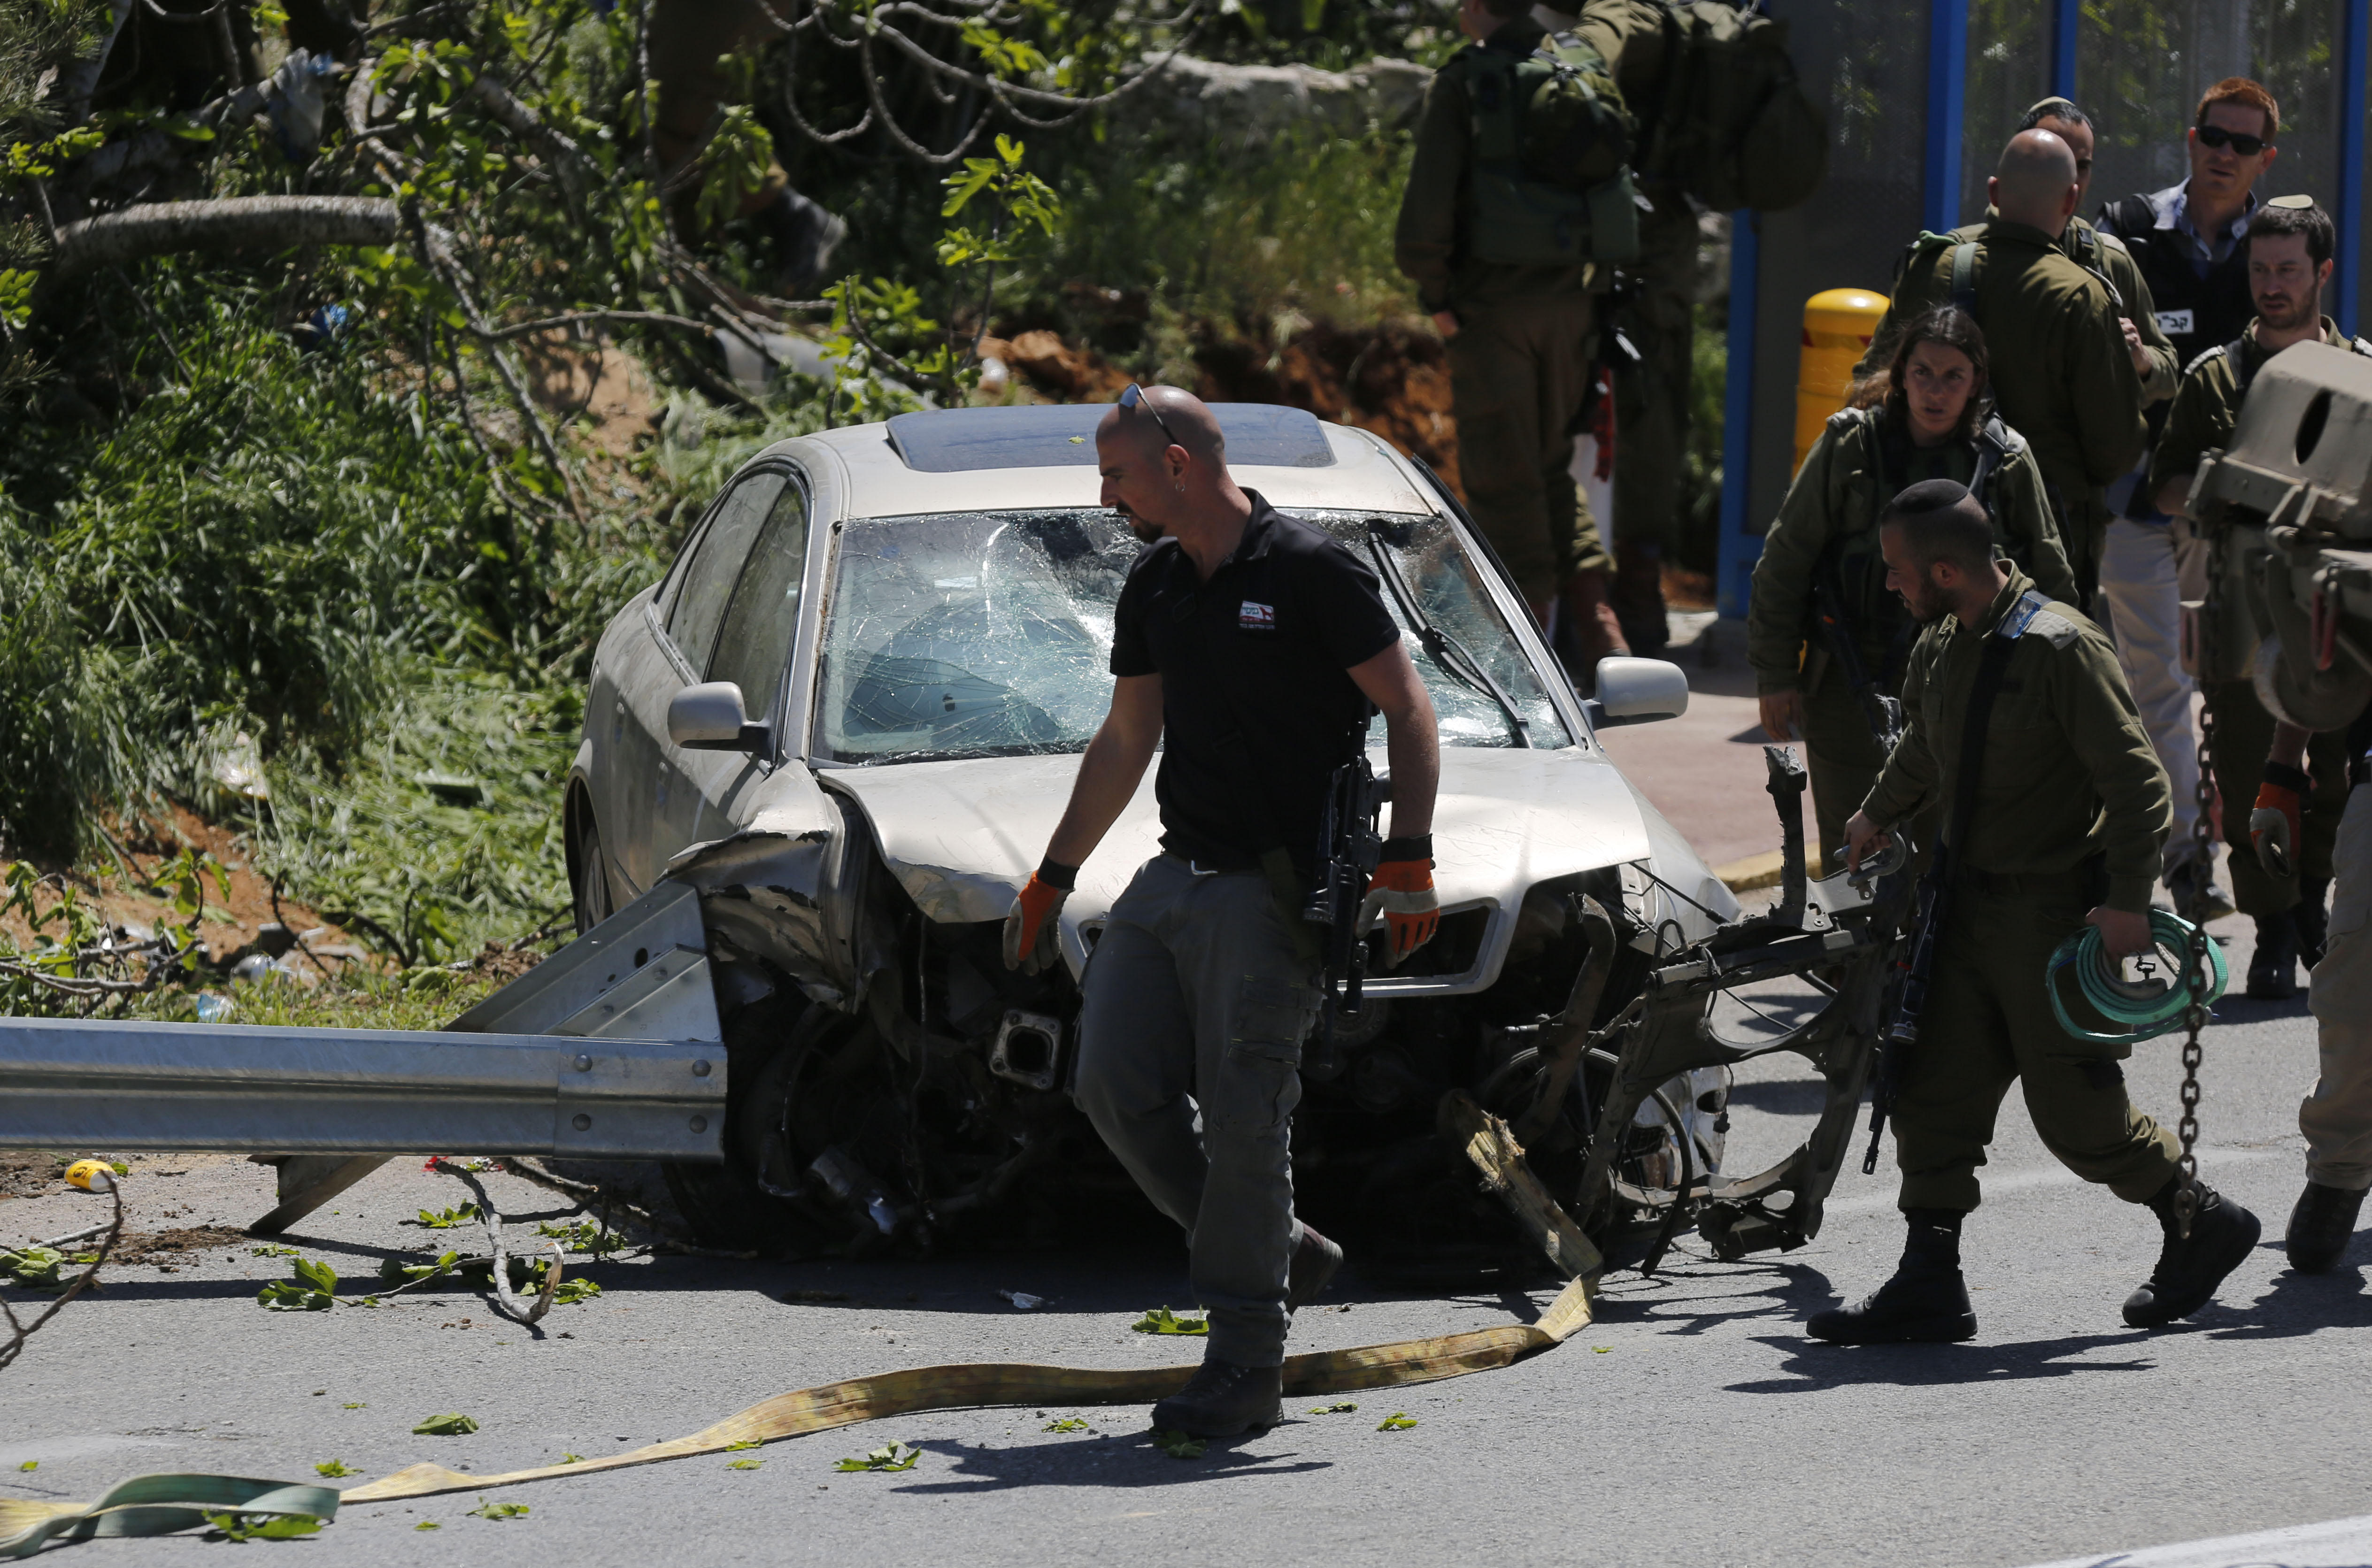 Israel says Palestinian car attack leaves 1 dead near Ofra Jewish